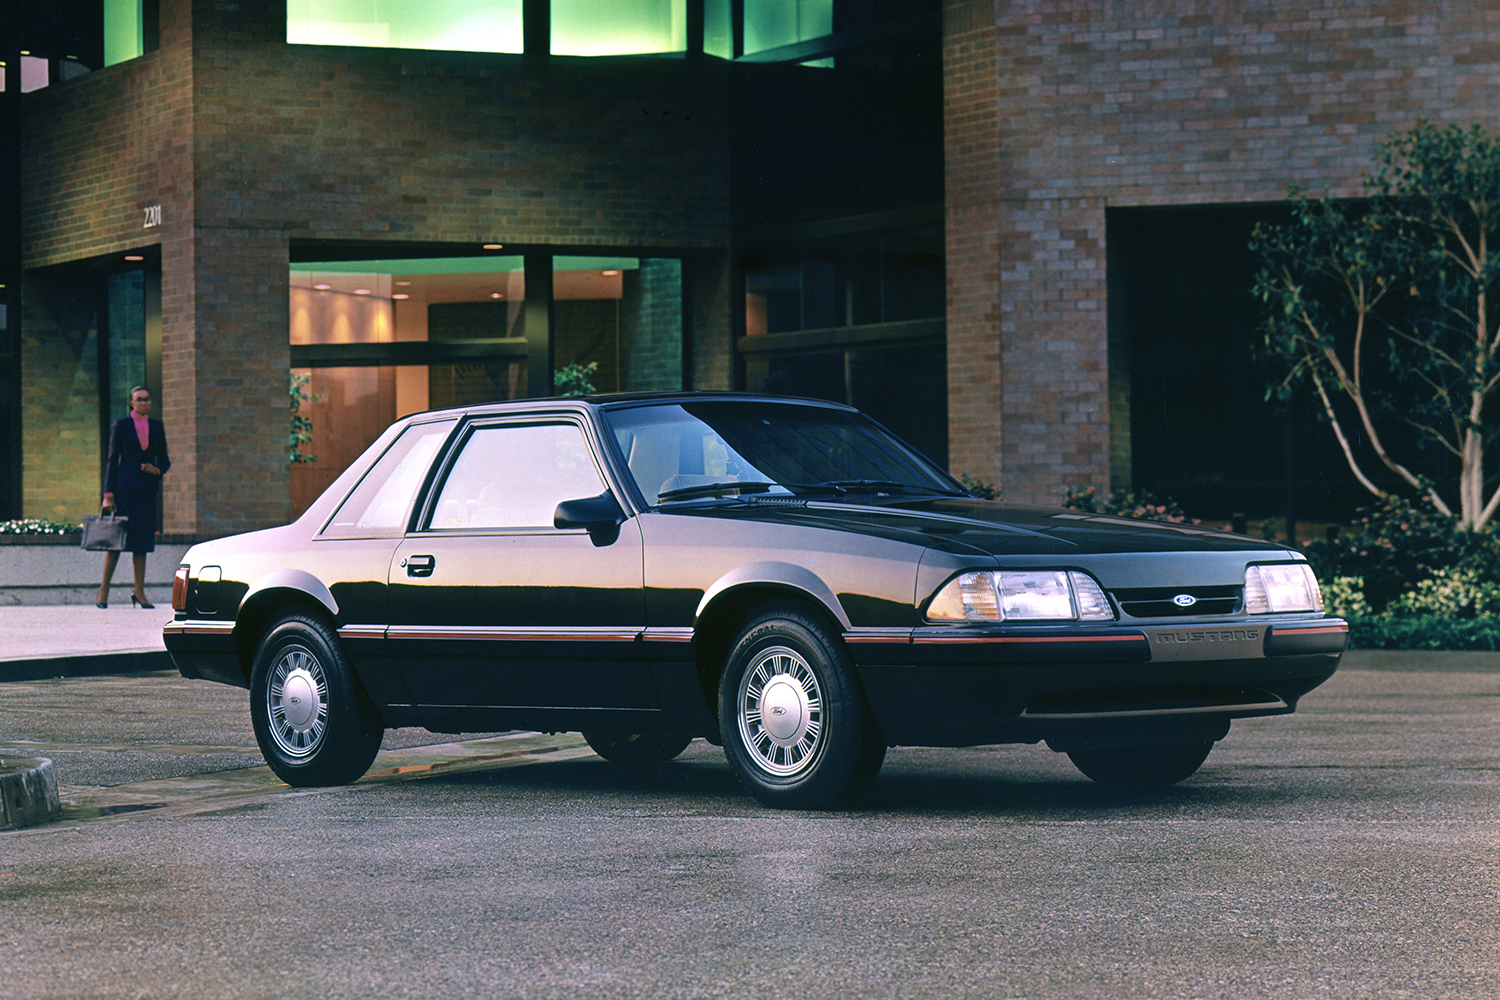 A 1988 Ford Mustang LX with a woman in the background.  The 5.0 Mustang is now considered a modern classic car.